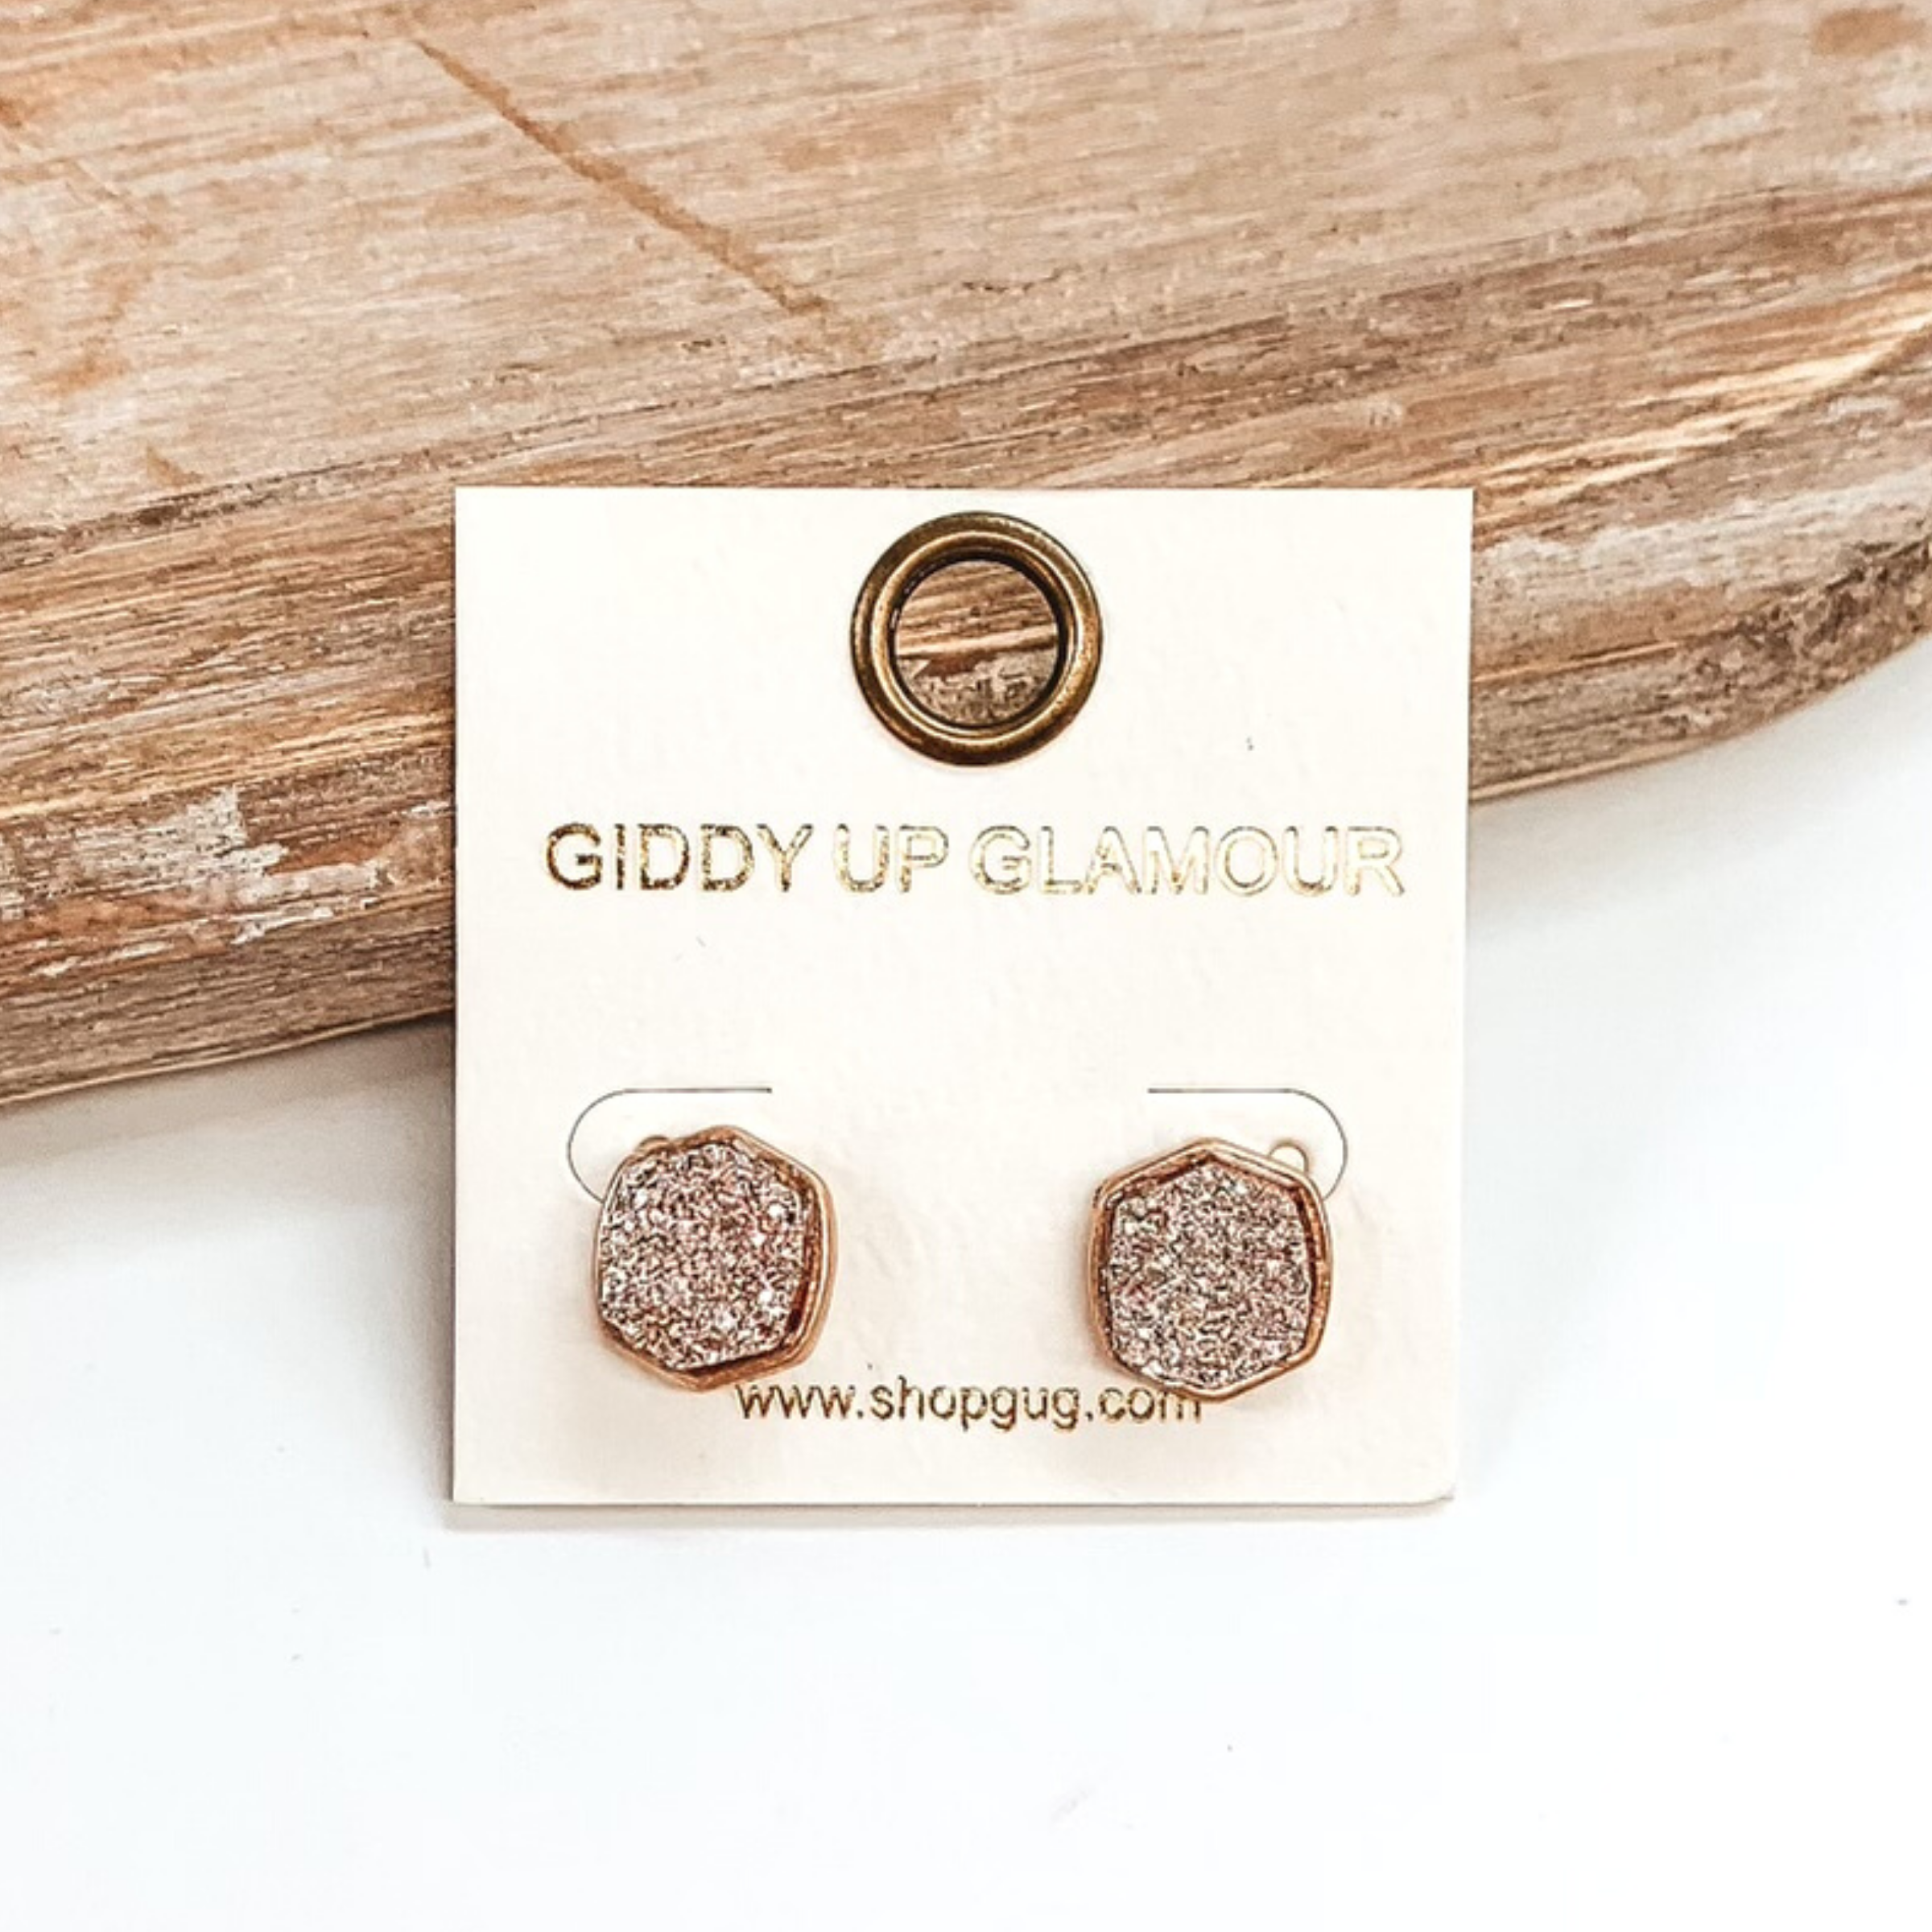 Gold post back earrings with druzy, rose gold, hexagon shaped stone. These earrings are pictured on a white earrings holder on a white background, leaning against a tan block.